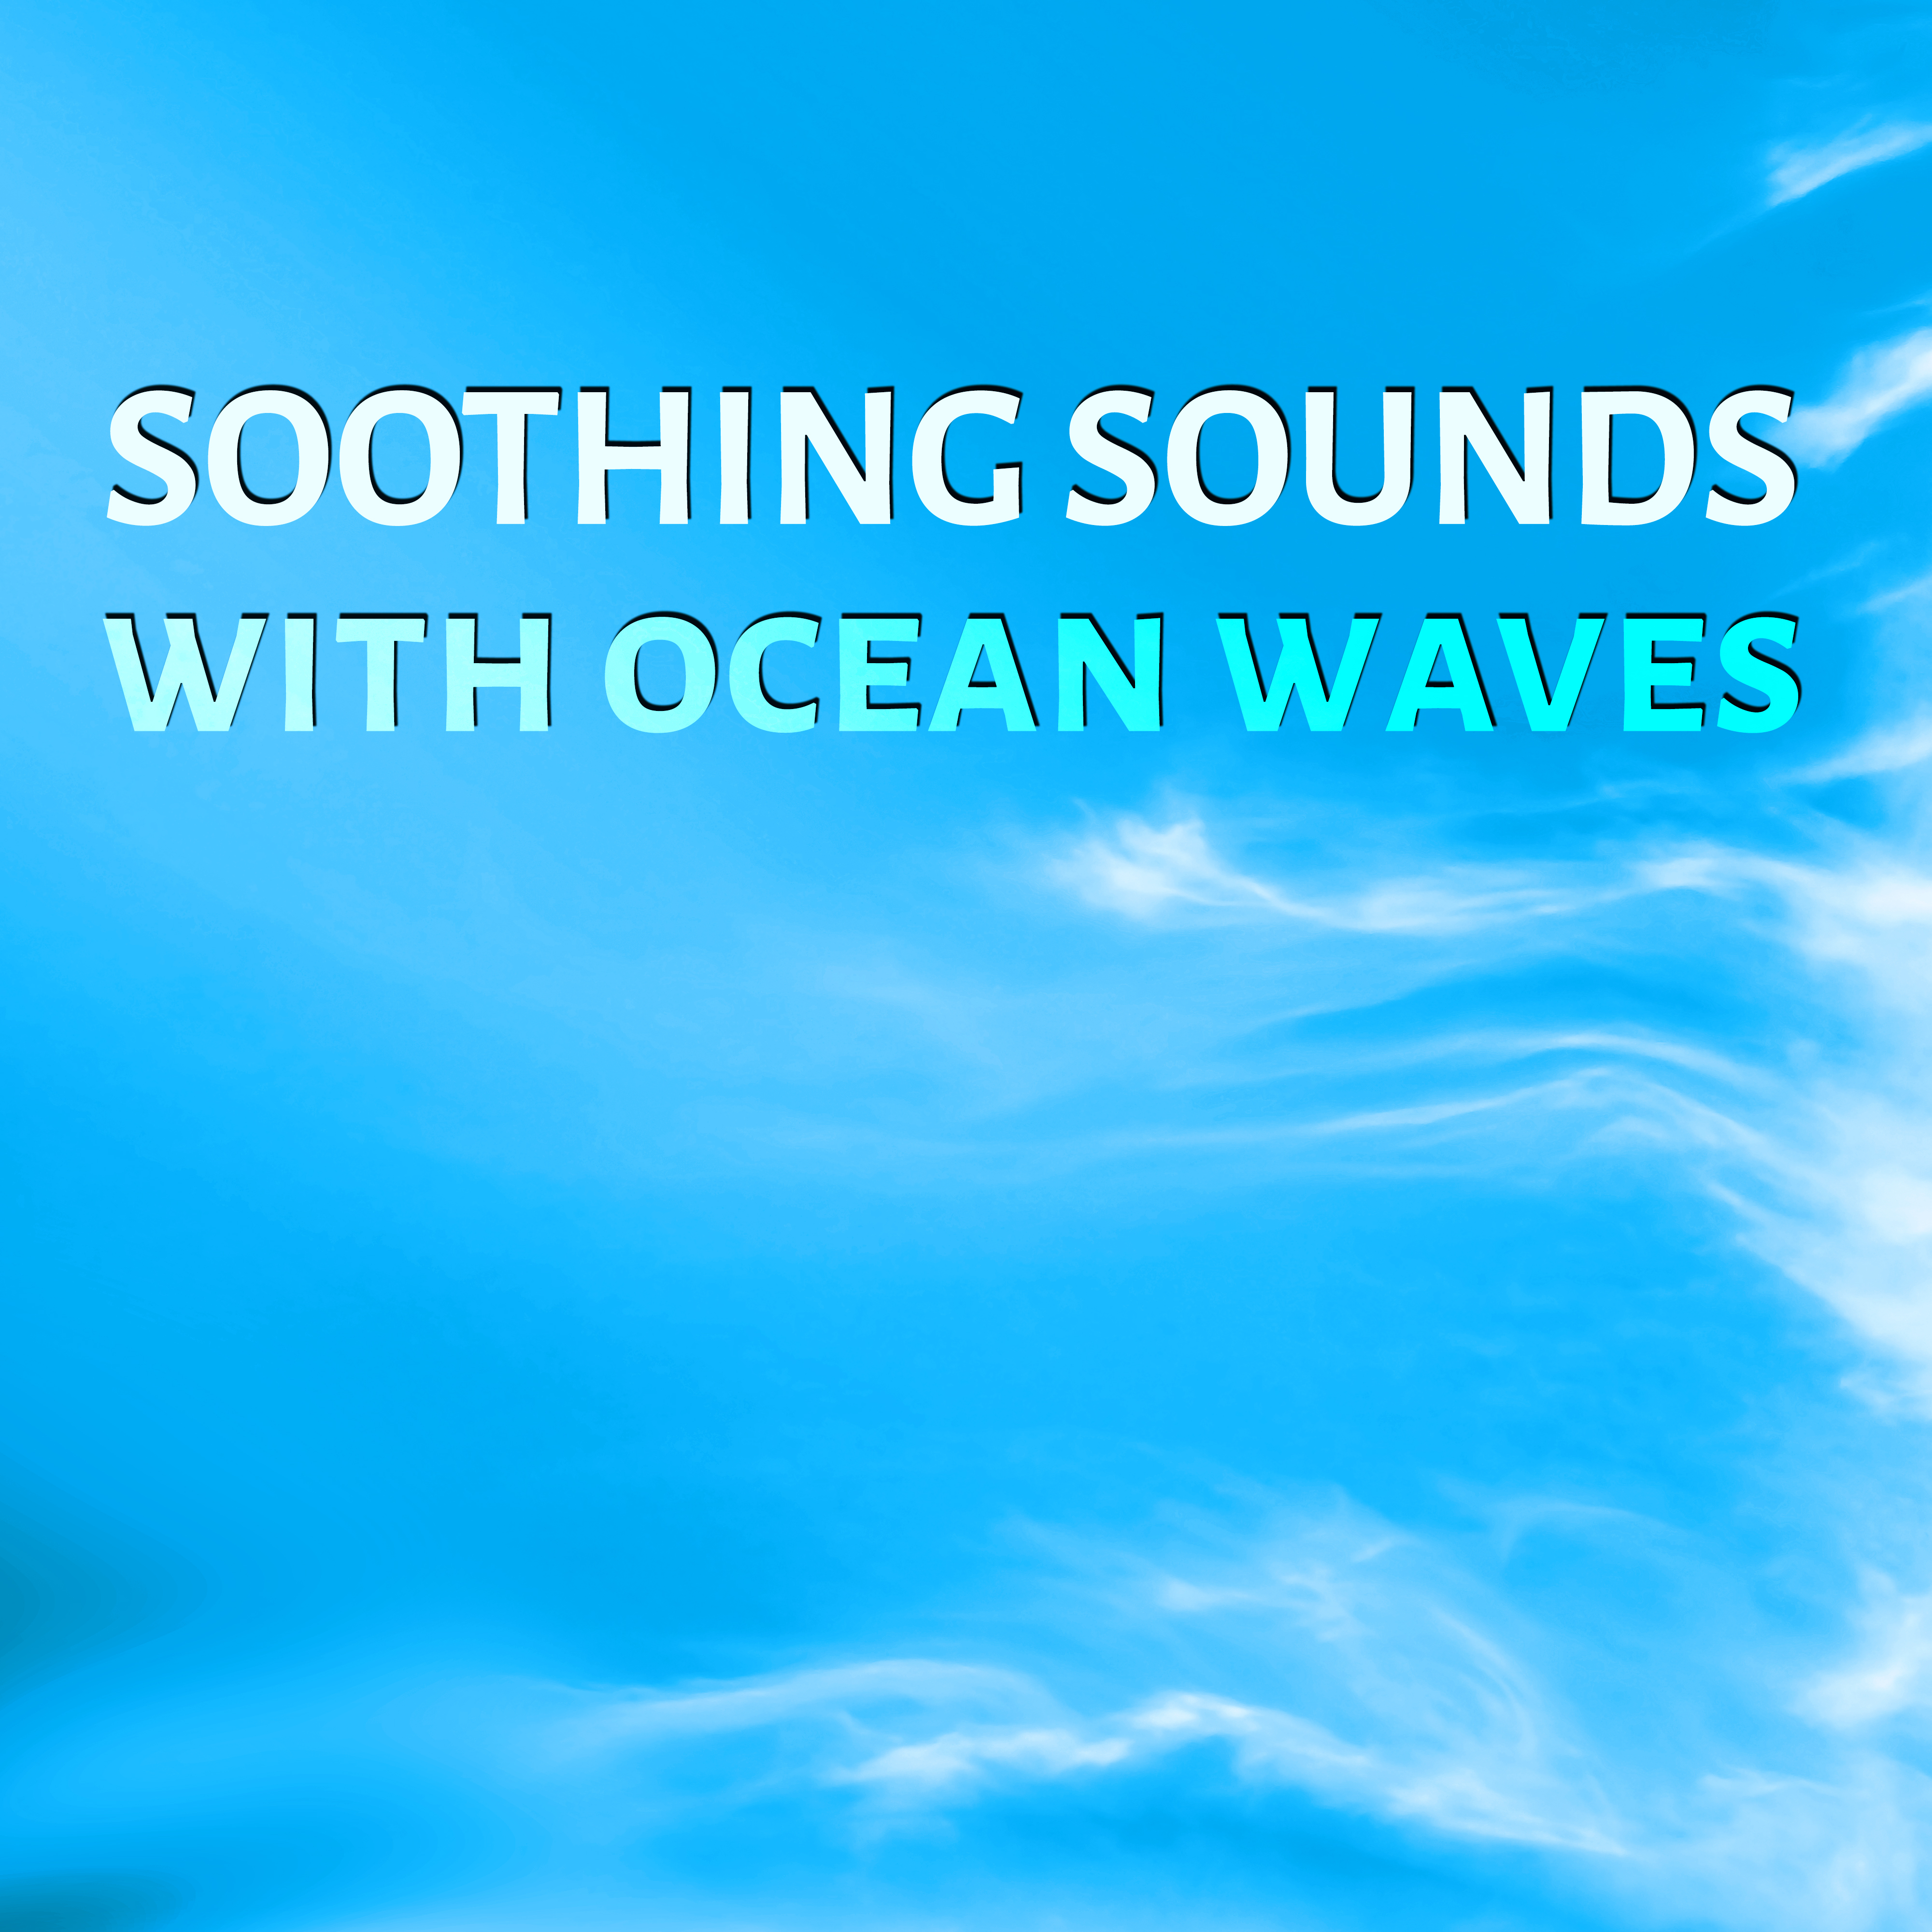 Soothing Sounds with Ocean Waves - Massage Therapy, Time to Spa Music Background for Wellness, Music for Healing Through Sound and Touch, Mindfulness Meditation, Waterfalls